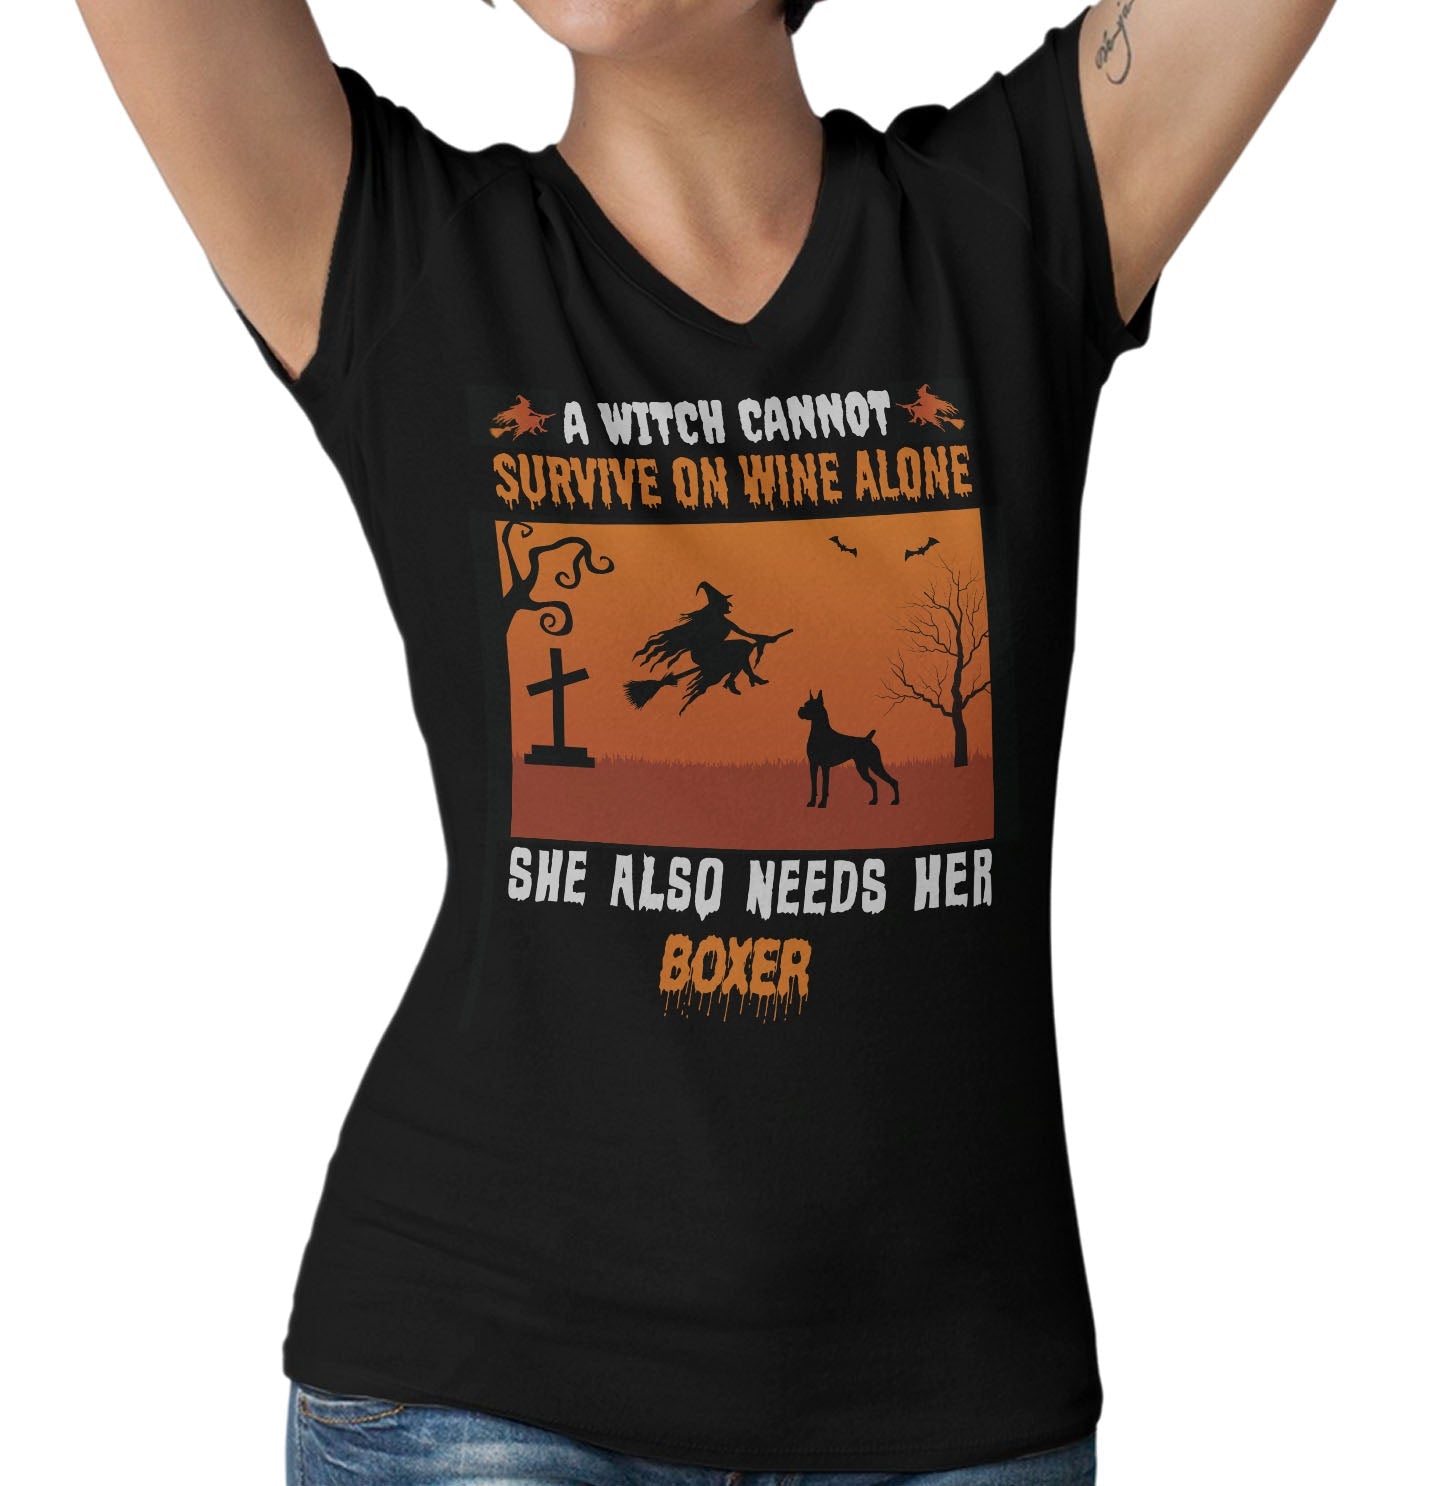 A Witch Needs Her Boxer - Women's V-Neck T-Shirt